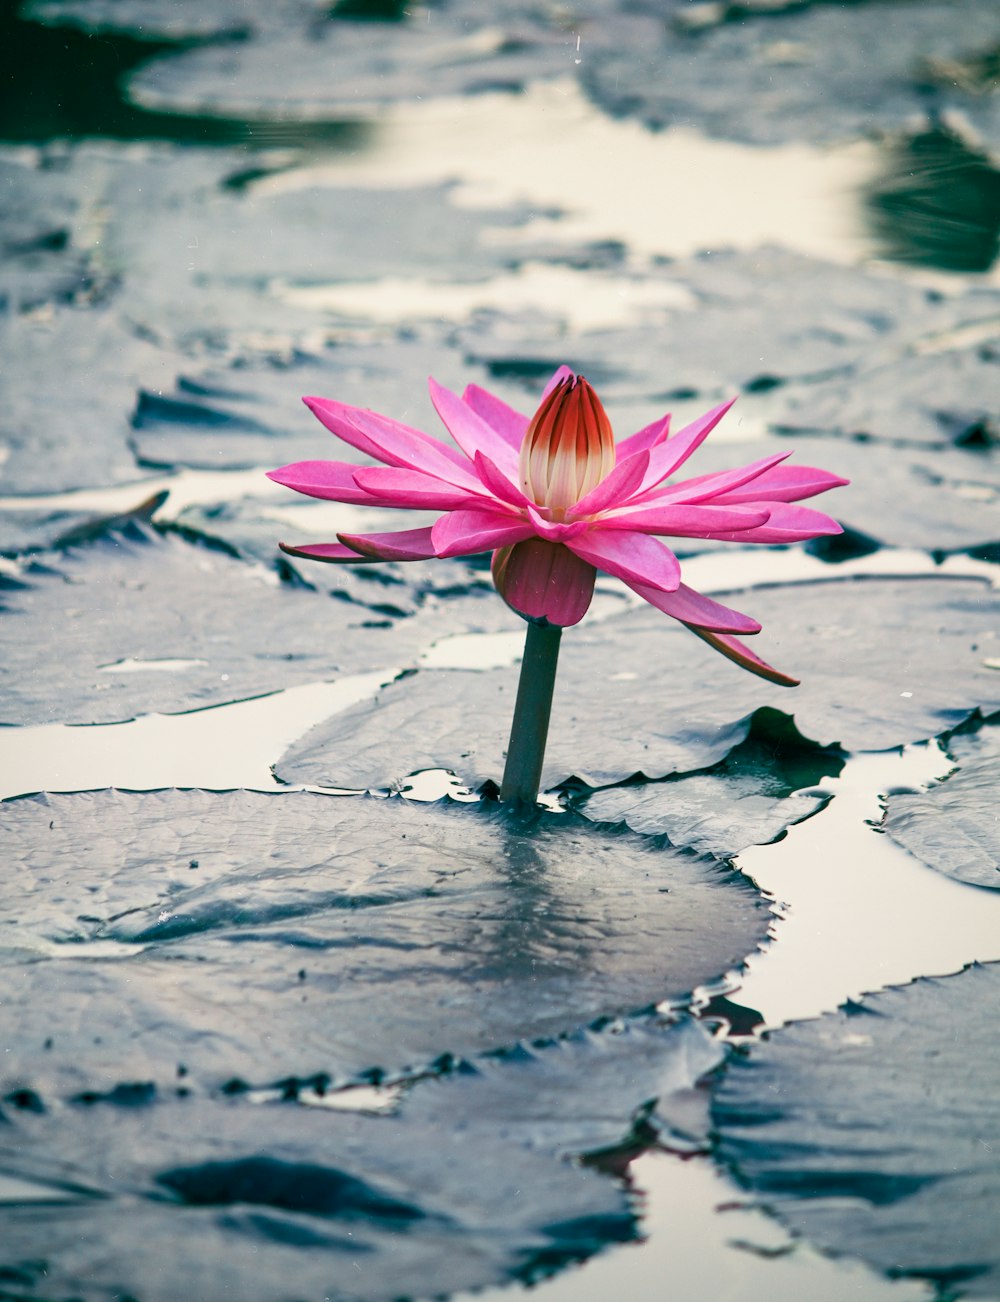 pink lotus flower on snow covered ground during daytime